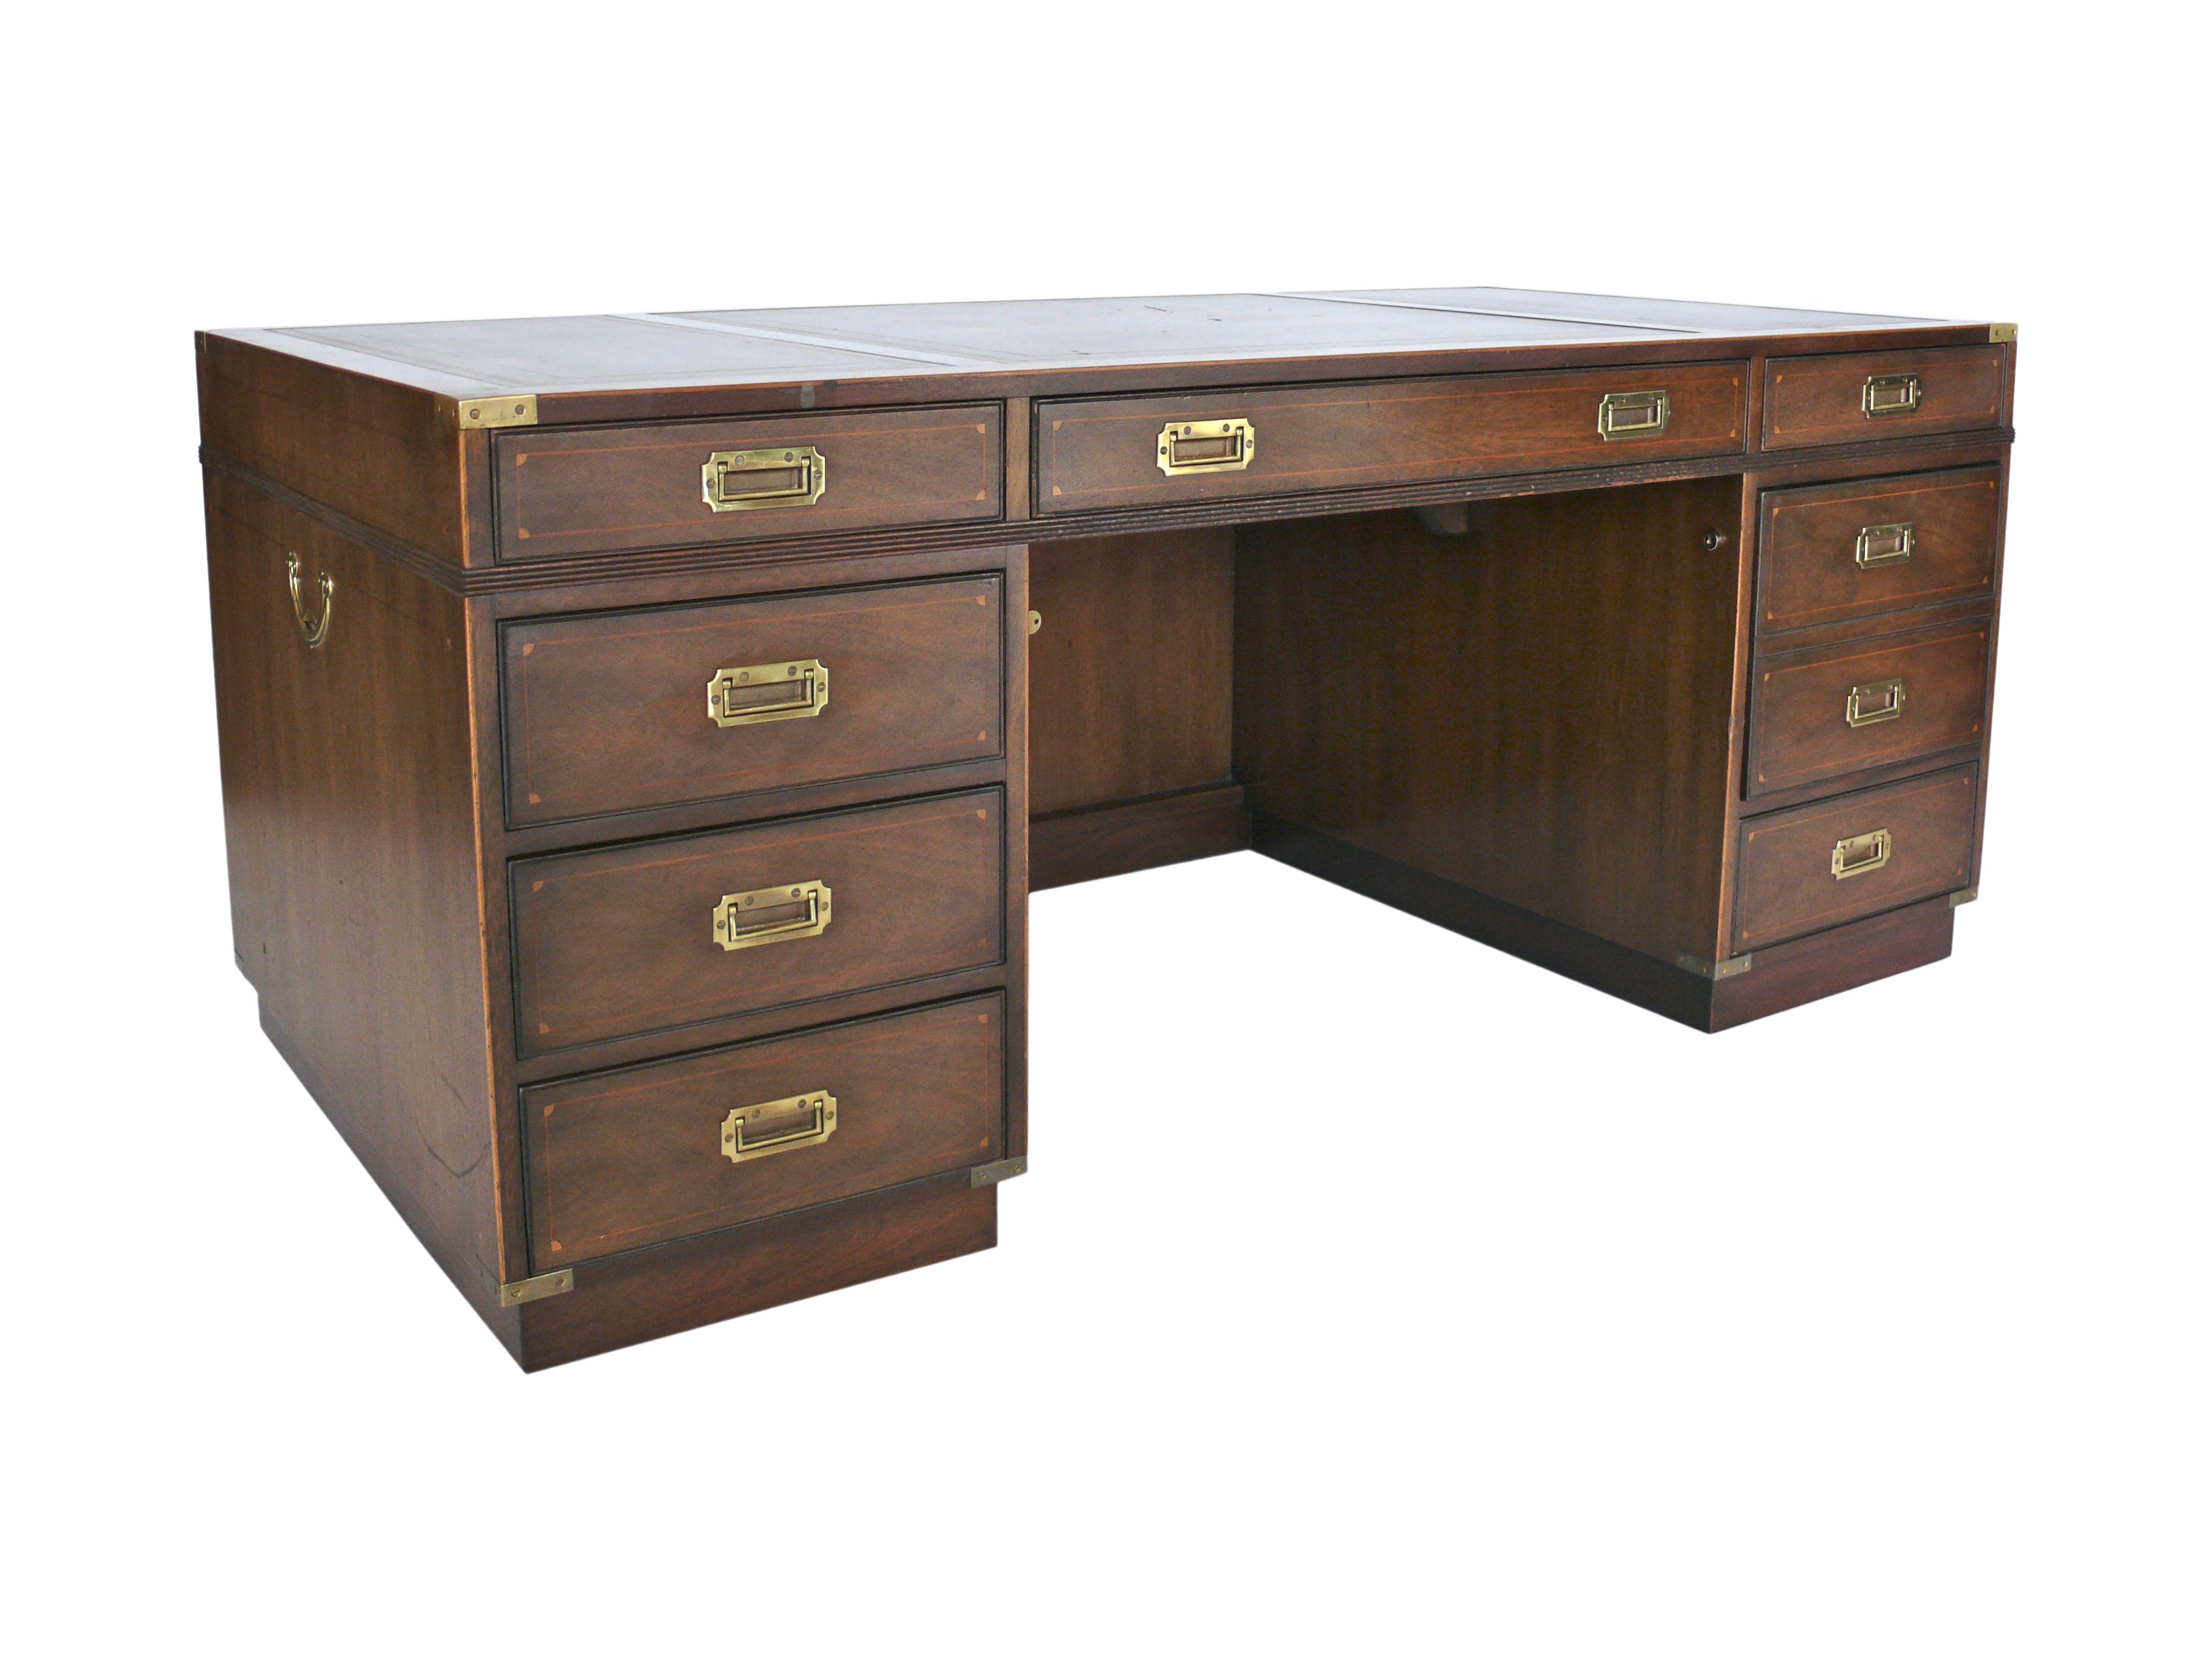 Rosewood Campaign Desk by Kittinger